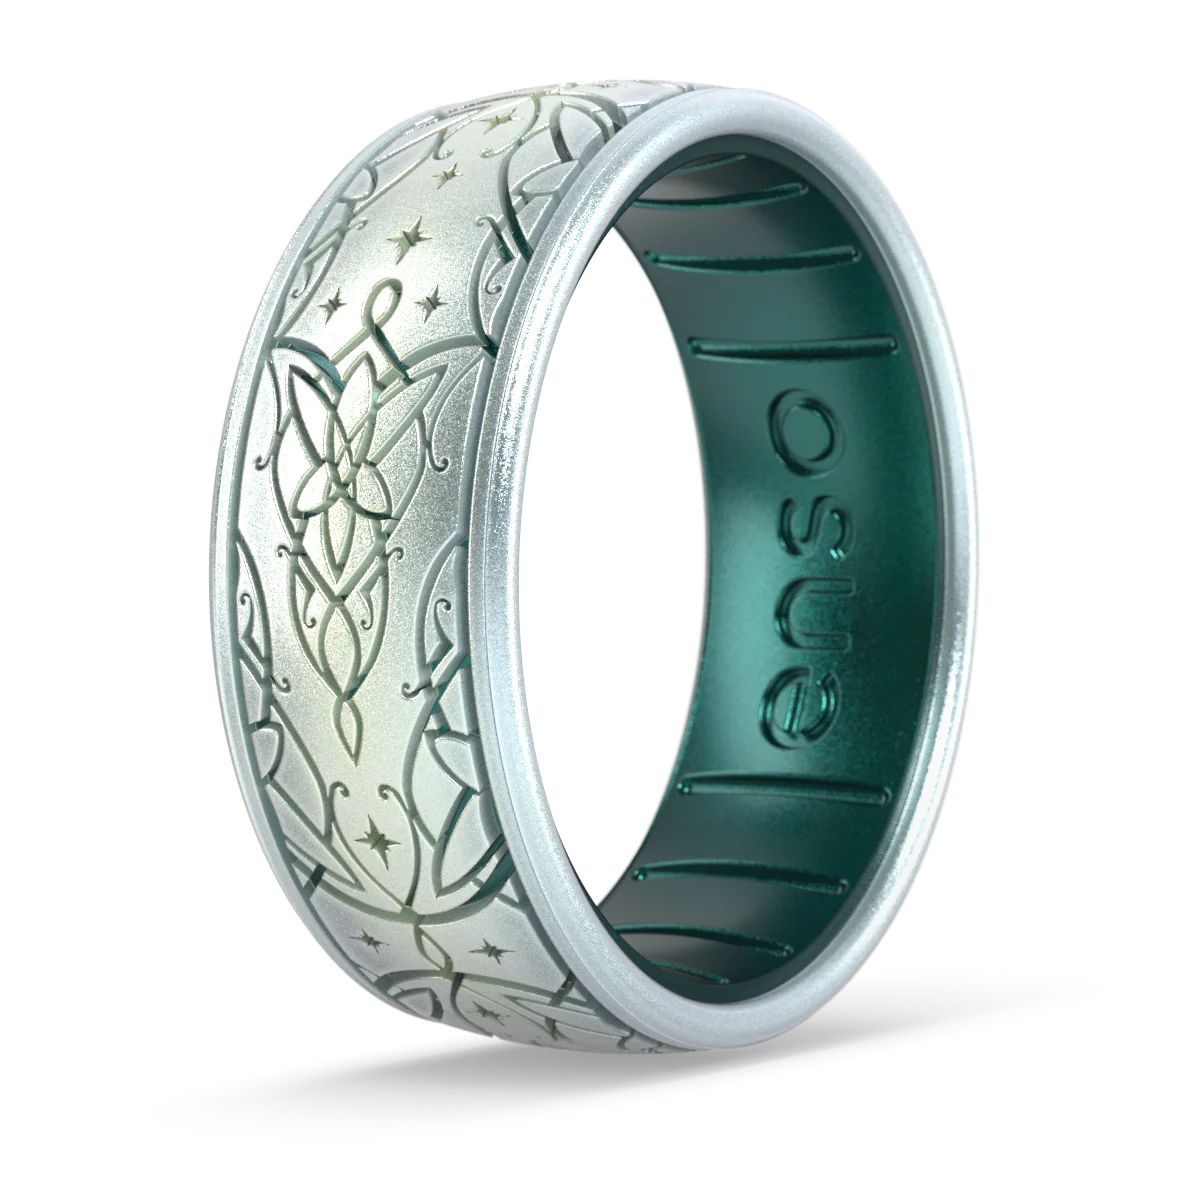 The Lord of the Rings Silicone Ring - Arwen's Evenstar | Enso Rings